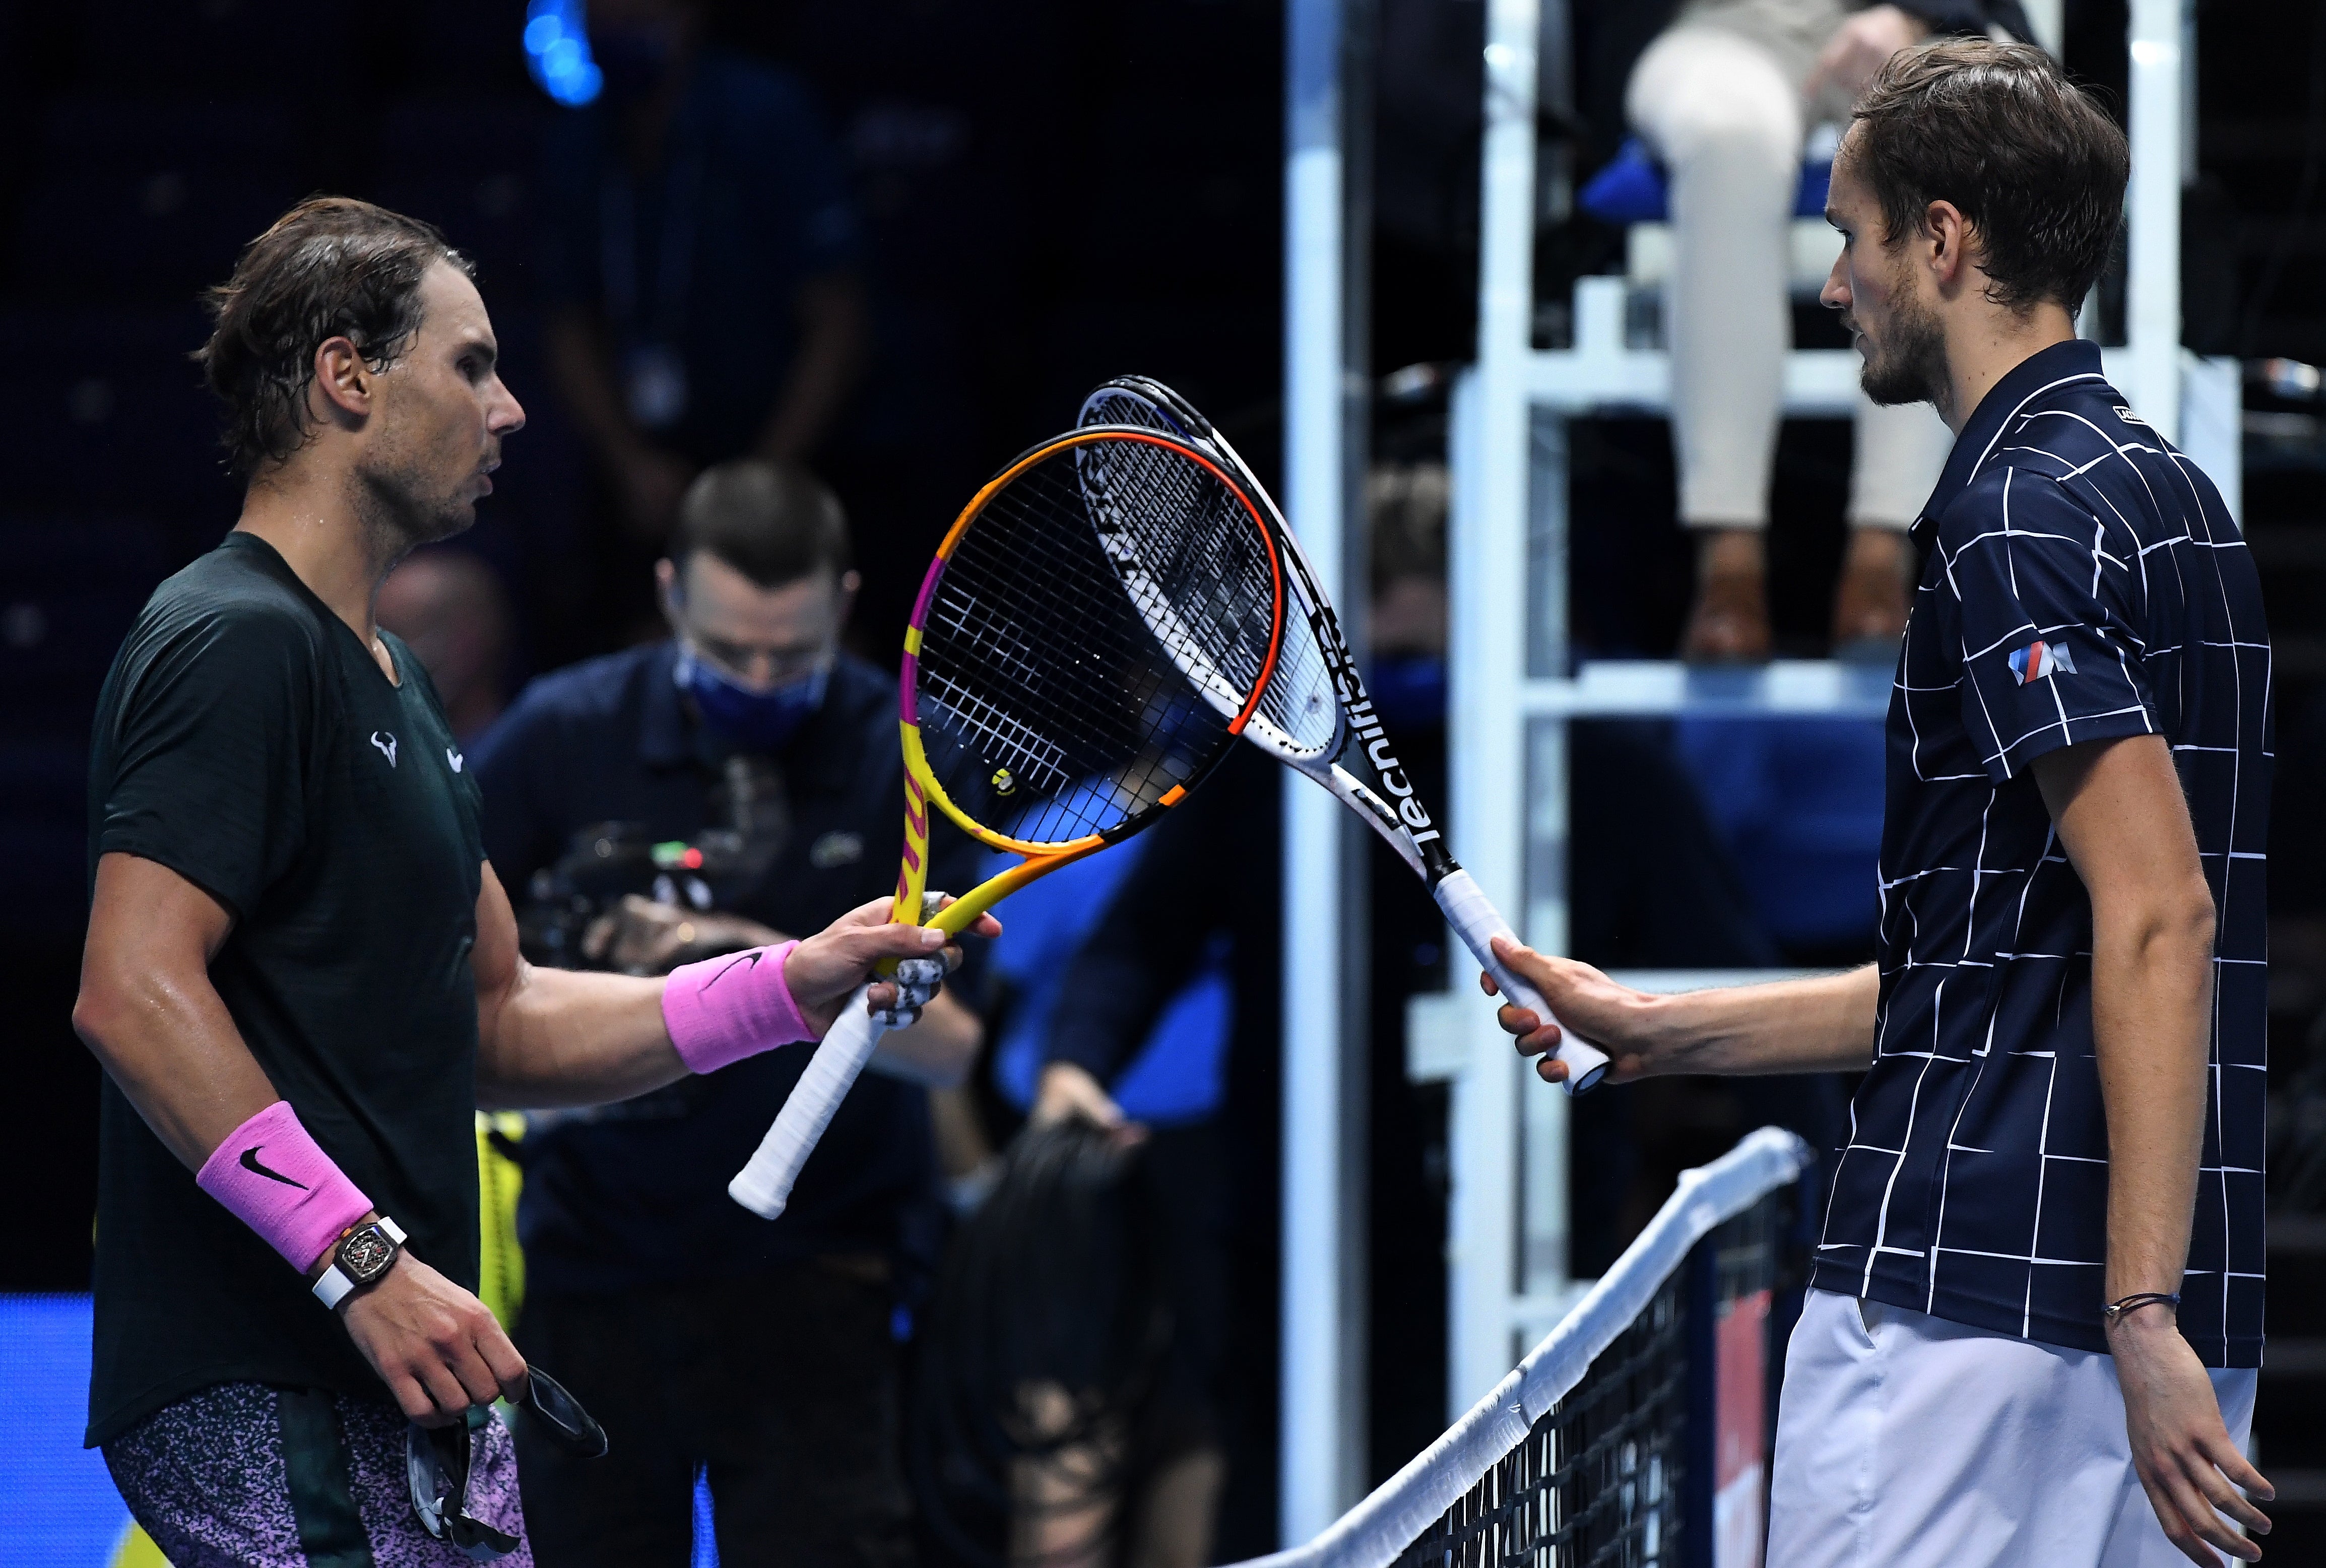 Medvedev became the first player to beat the top three seeds at the ATP Finals